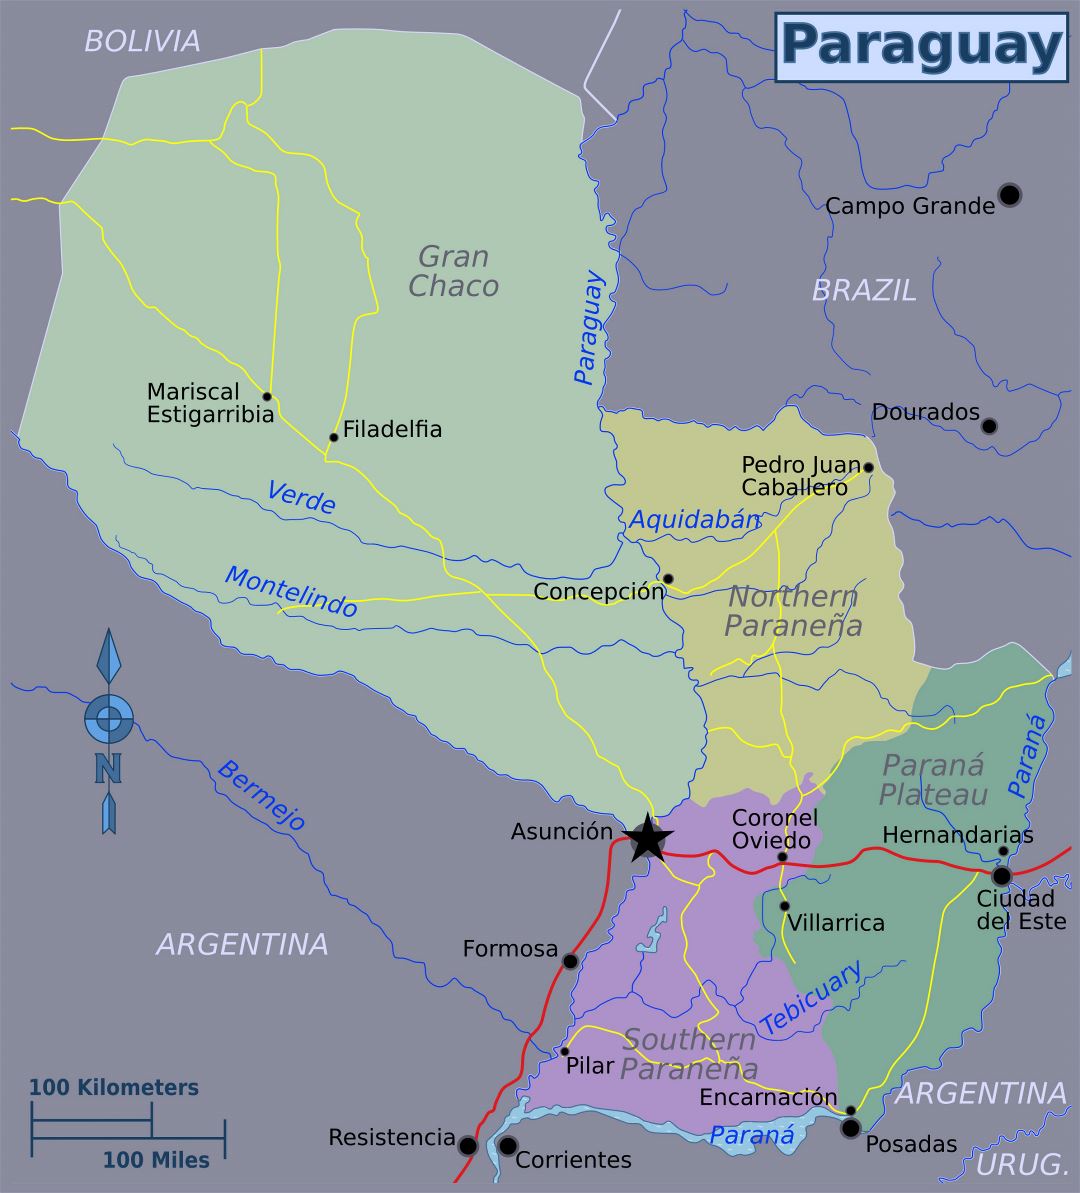 Large regions map of Paraguay